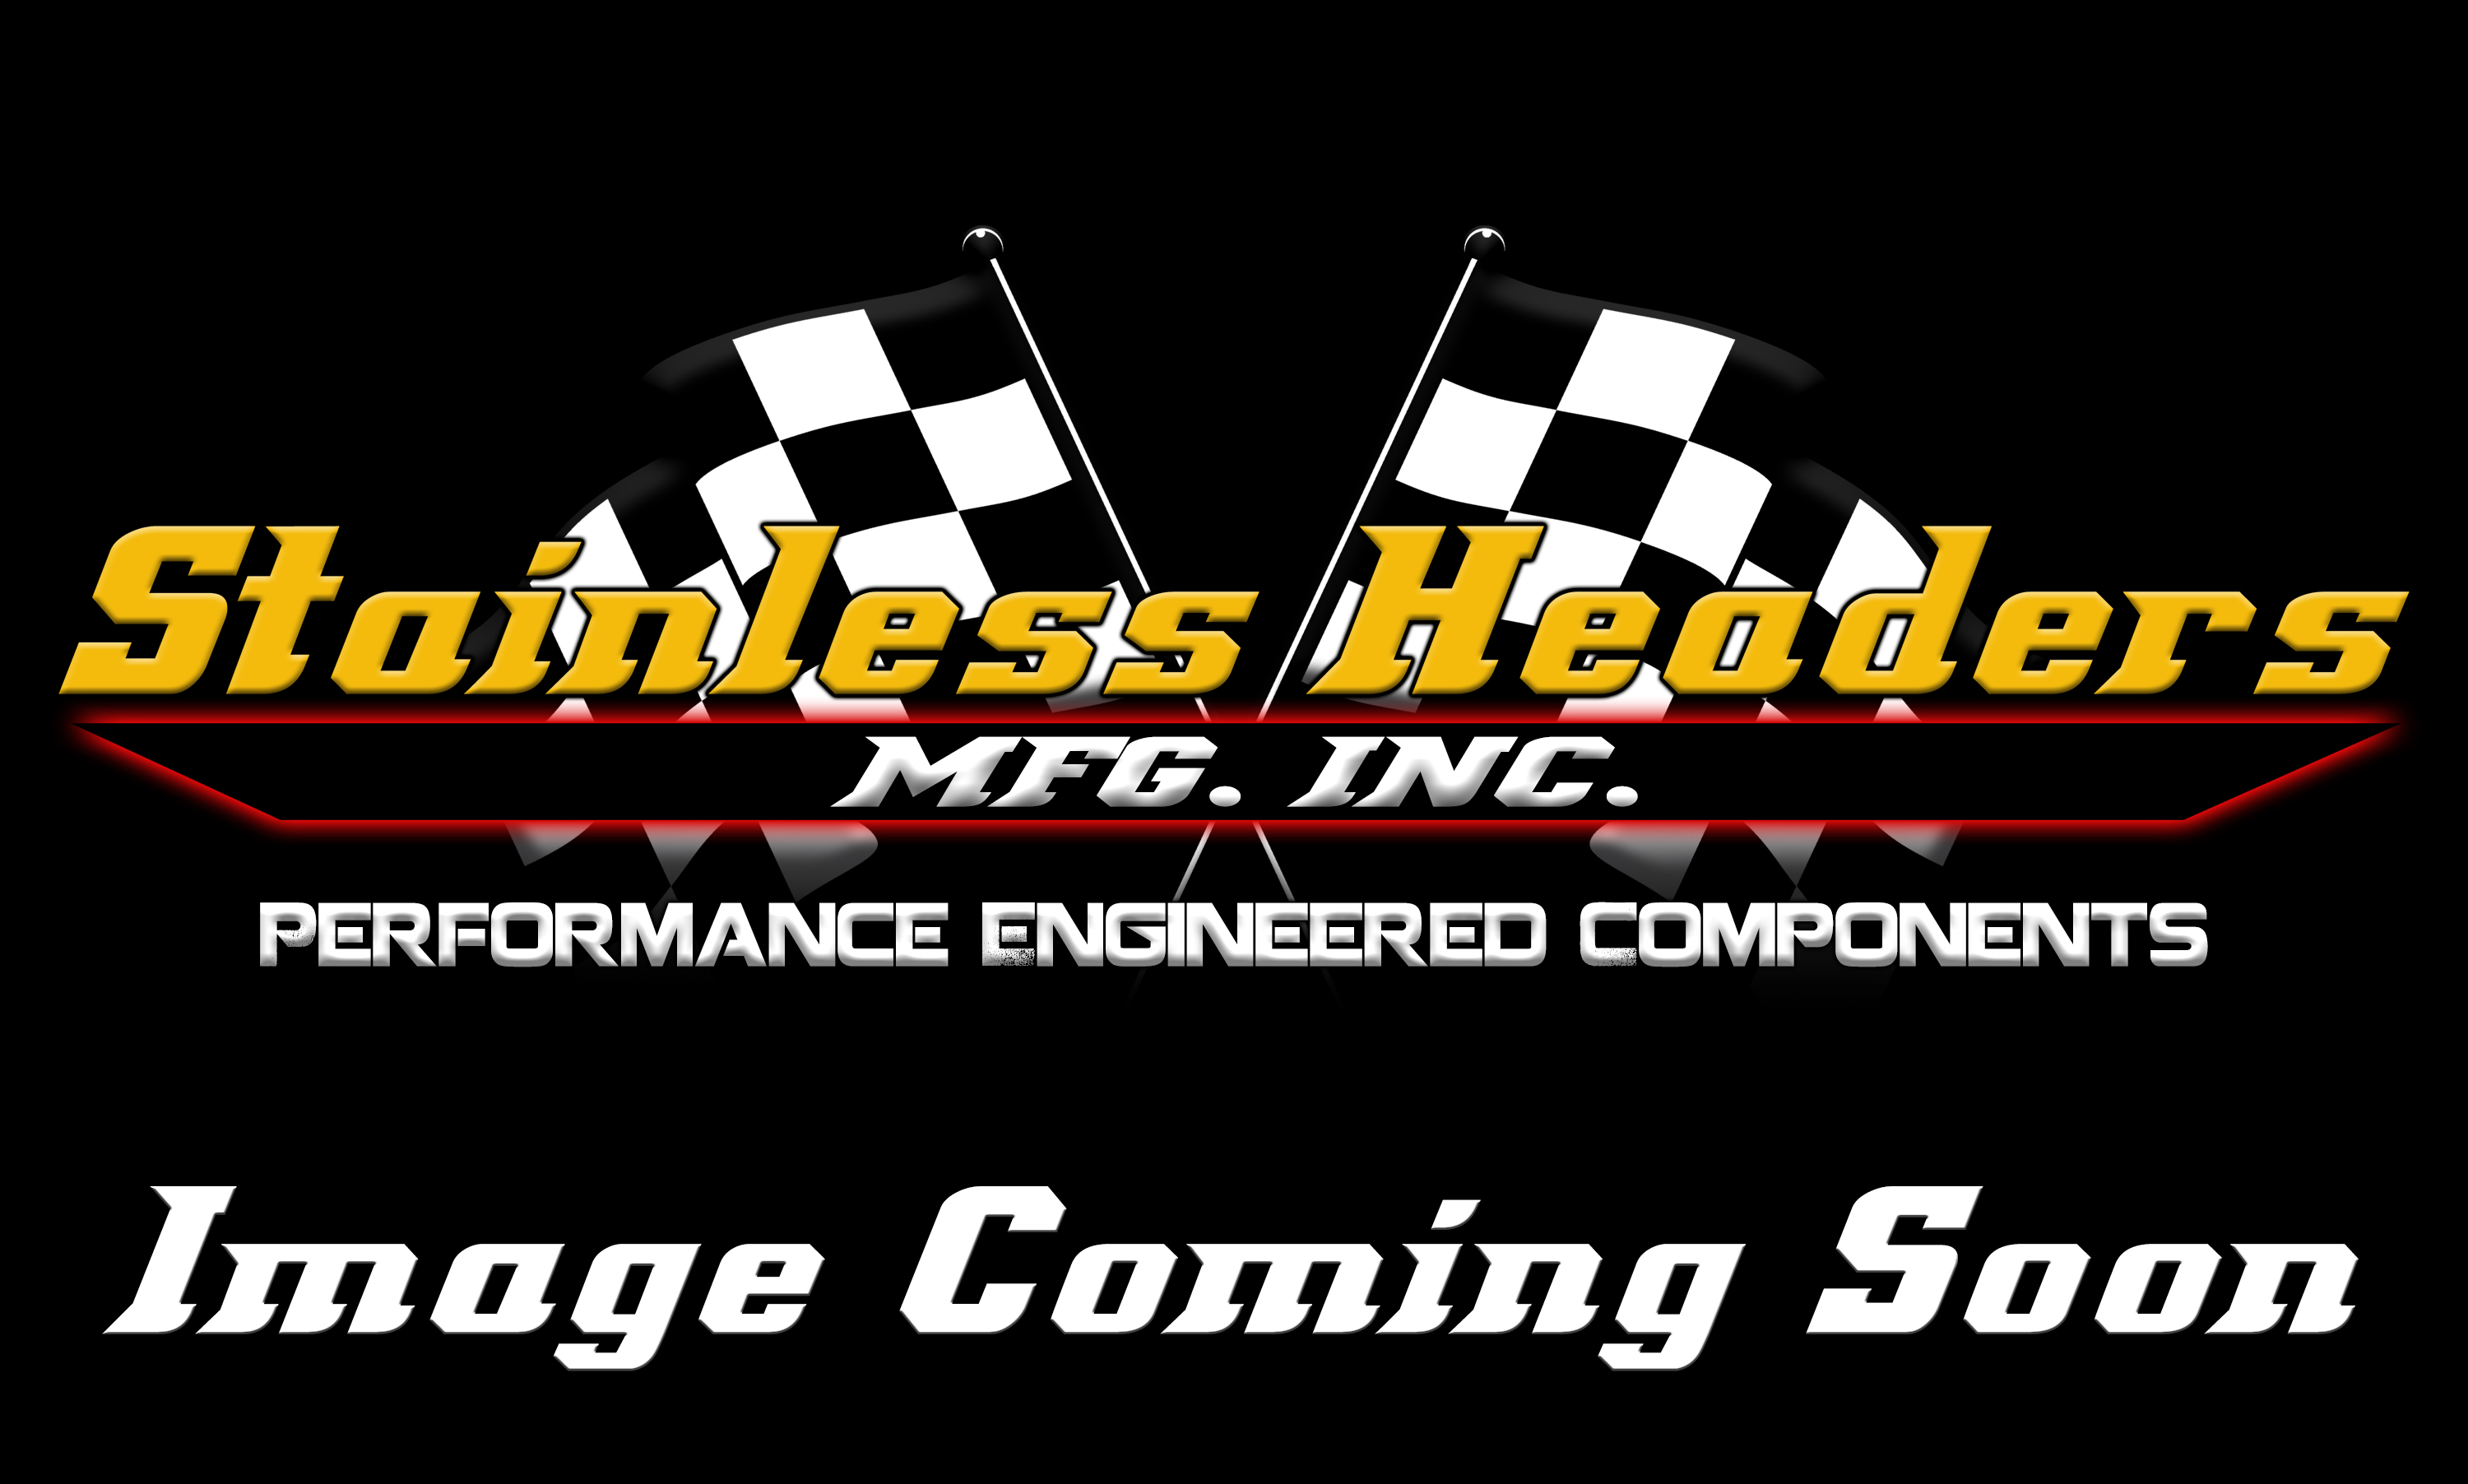 Custom Header Components - Merge Collectors - Stainless Headers - 1 7/8" Primary 3 into 1 Performance Merge Collector-16ga 304ss